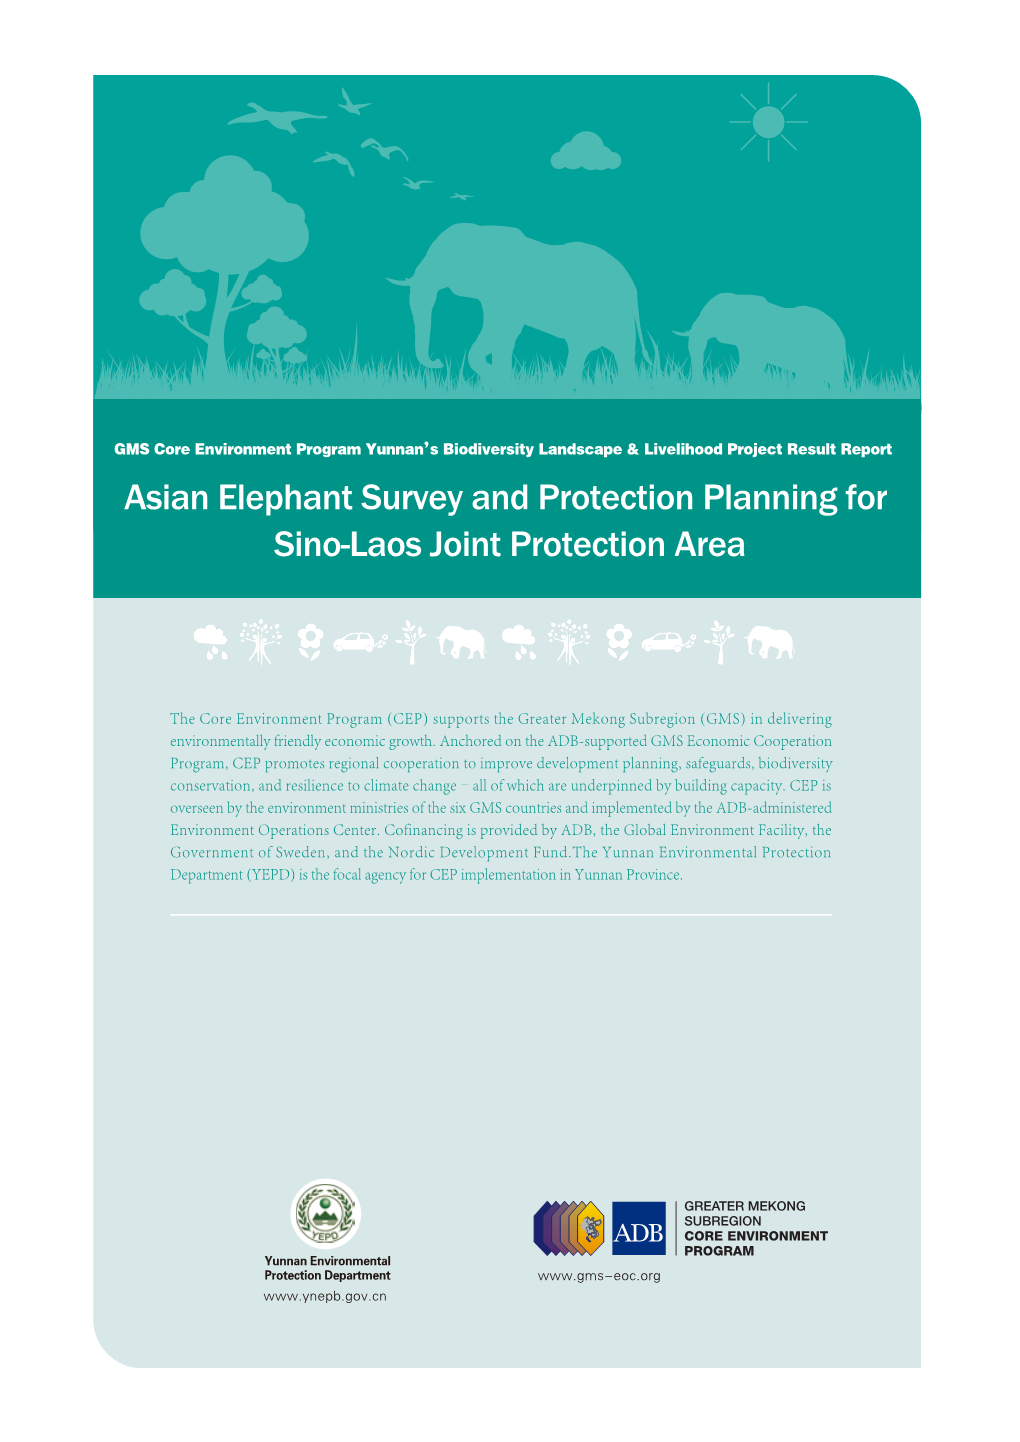 Asian Elephant Survey and Protection Planning for Sino-Laos Joint Protection Area